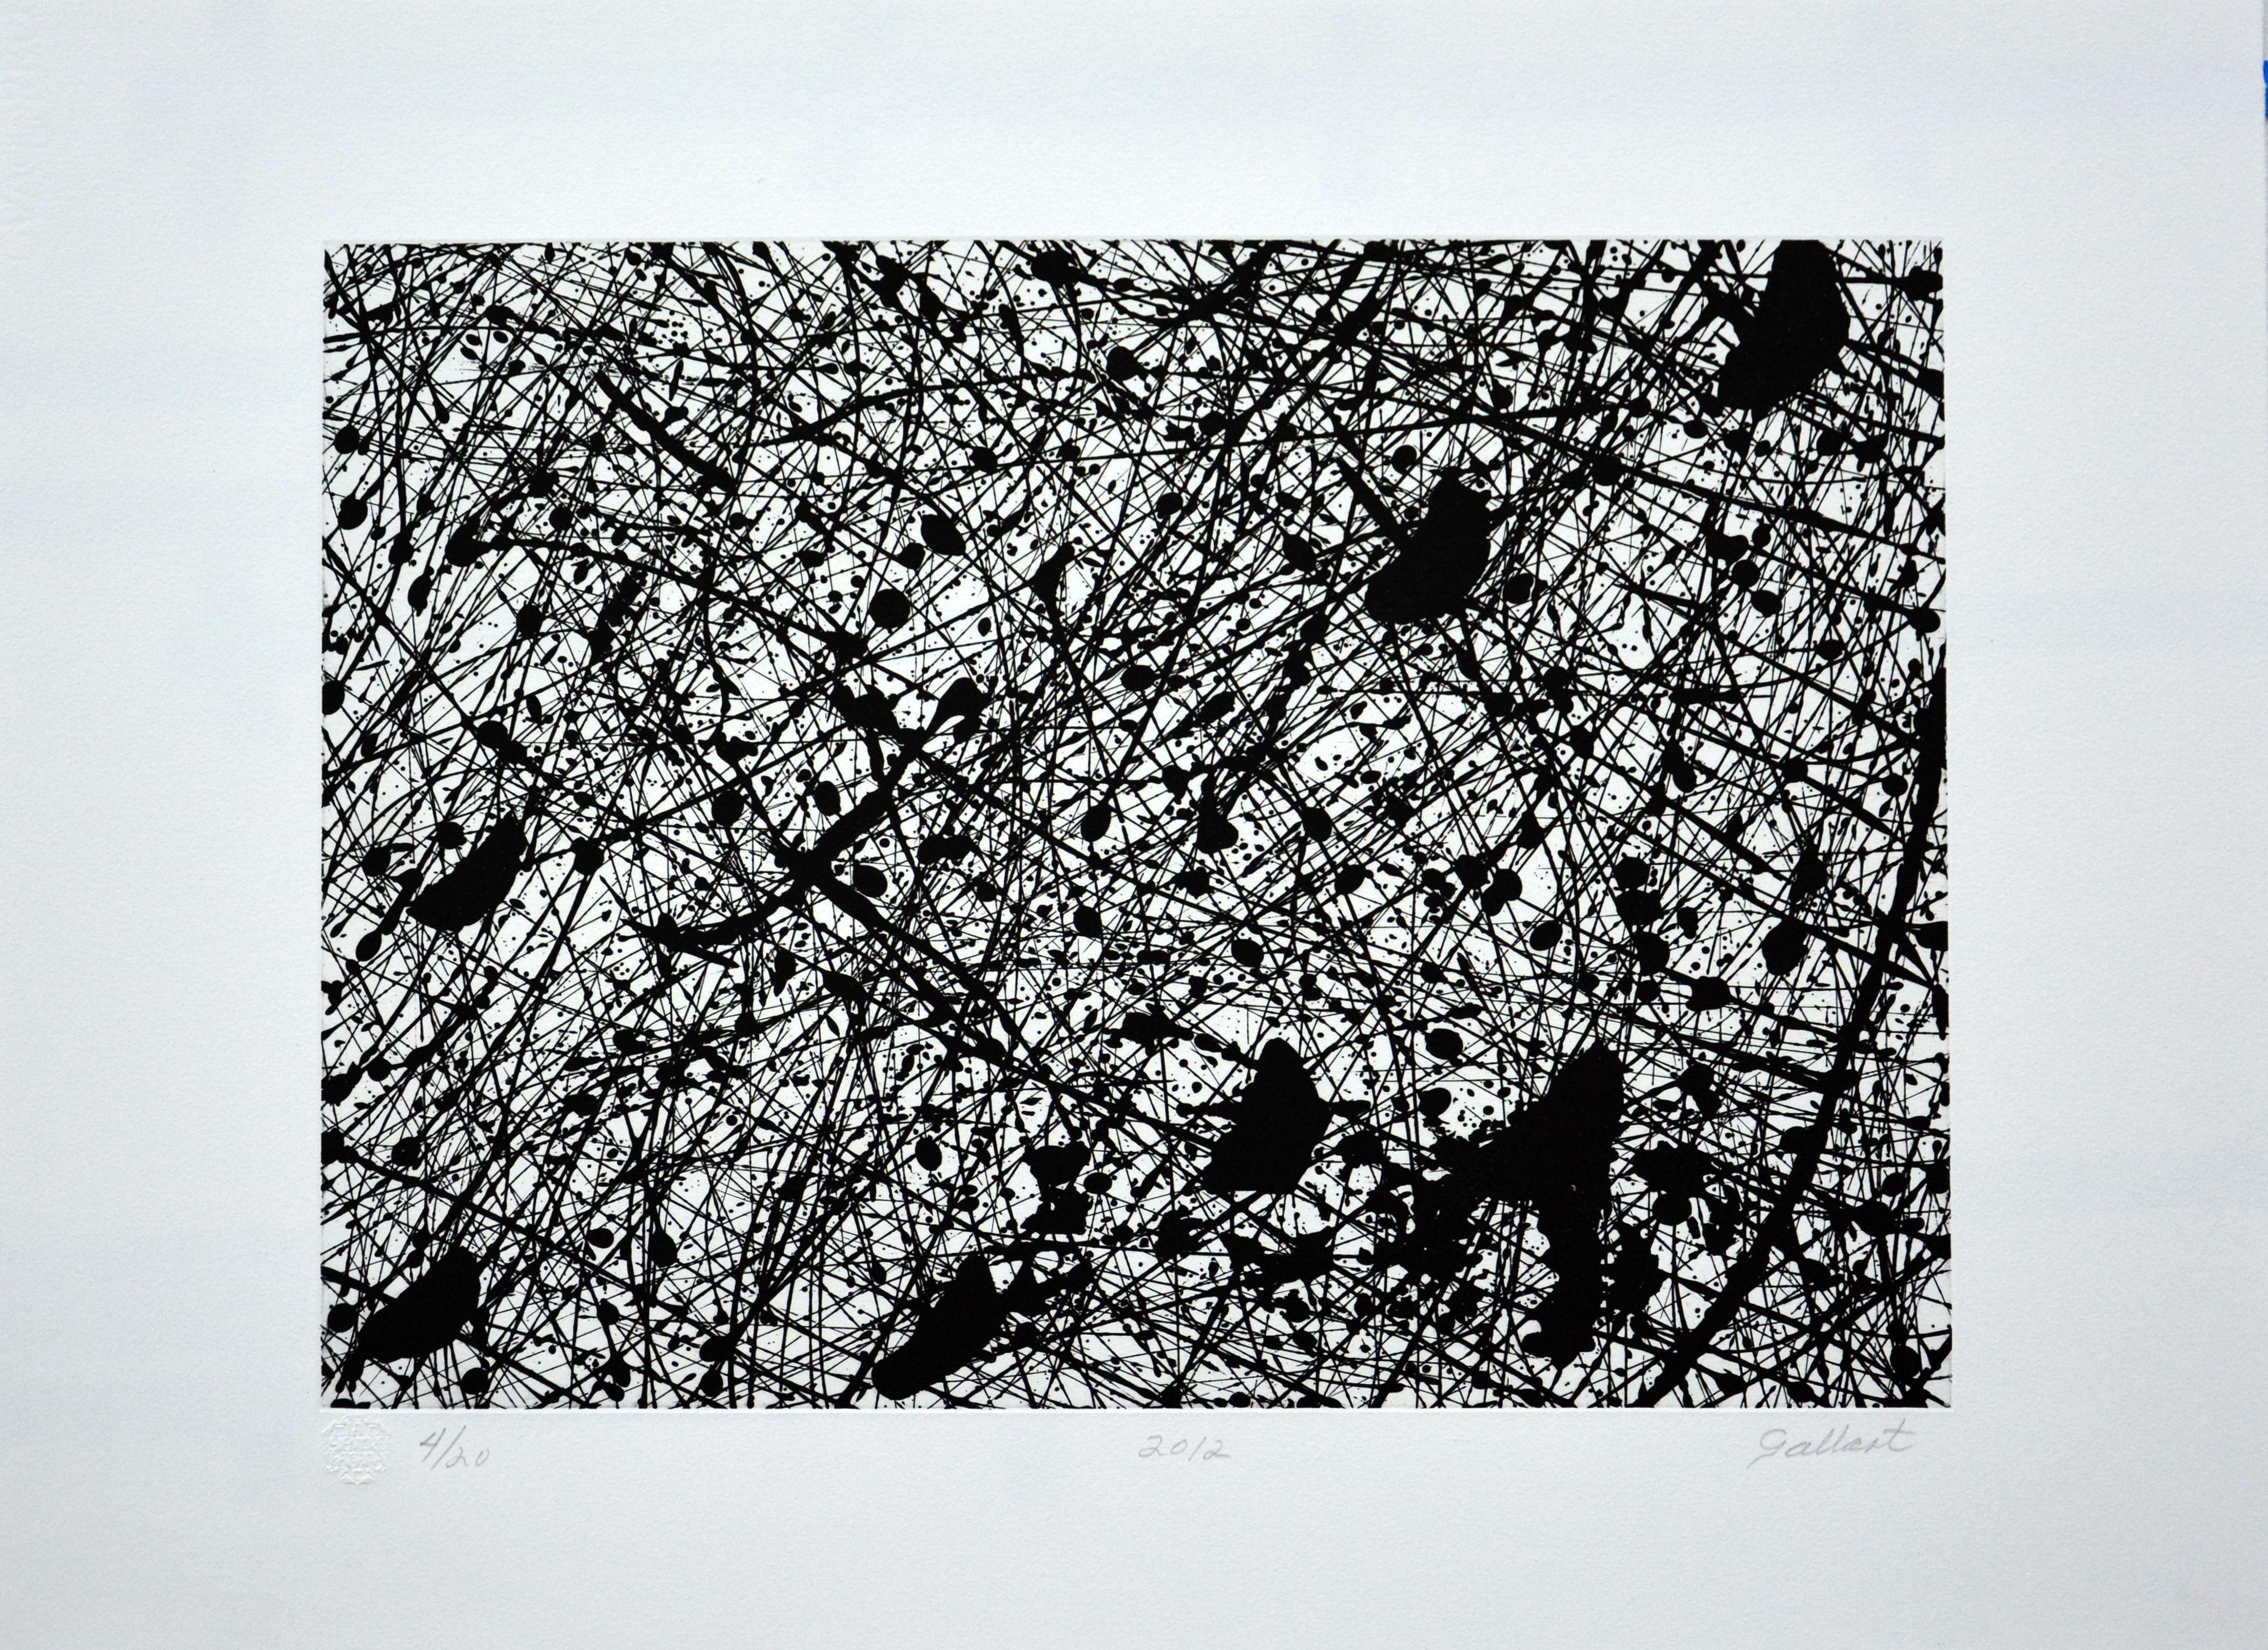 Enrique Gallart (Mexico, 1948)
'2012', 2012
engraving, sugarlift on paper Guarro Biblos 250g.
20.9 x 28.6 in. (53 x 72.5 cm.)
Edition of 20
ID: GAL-102
Unframed